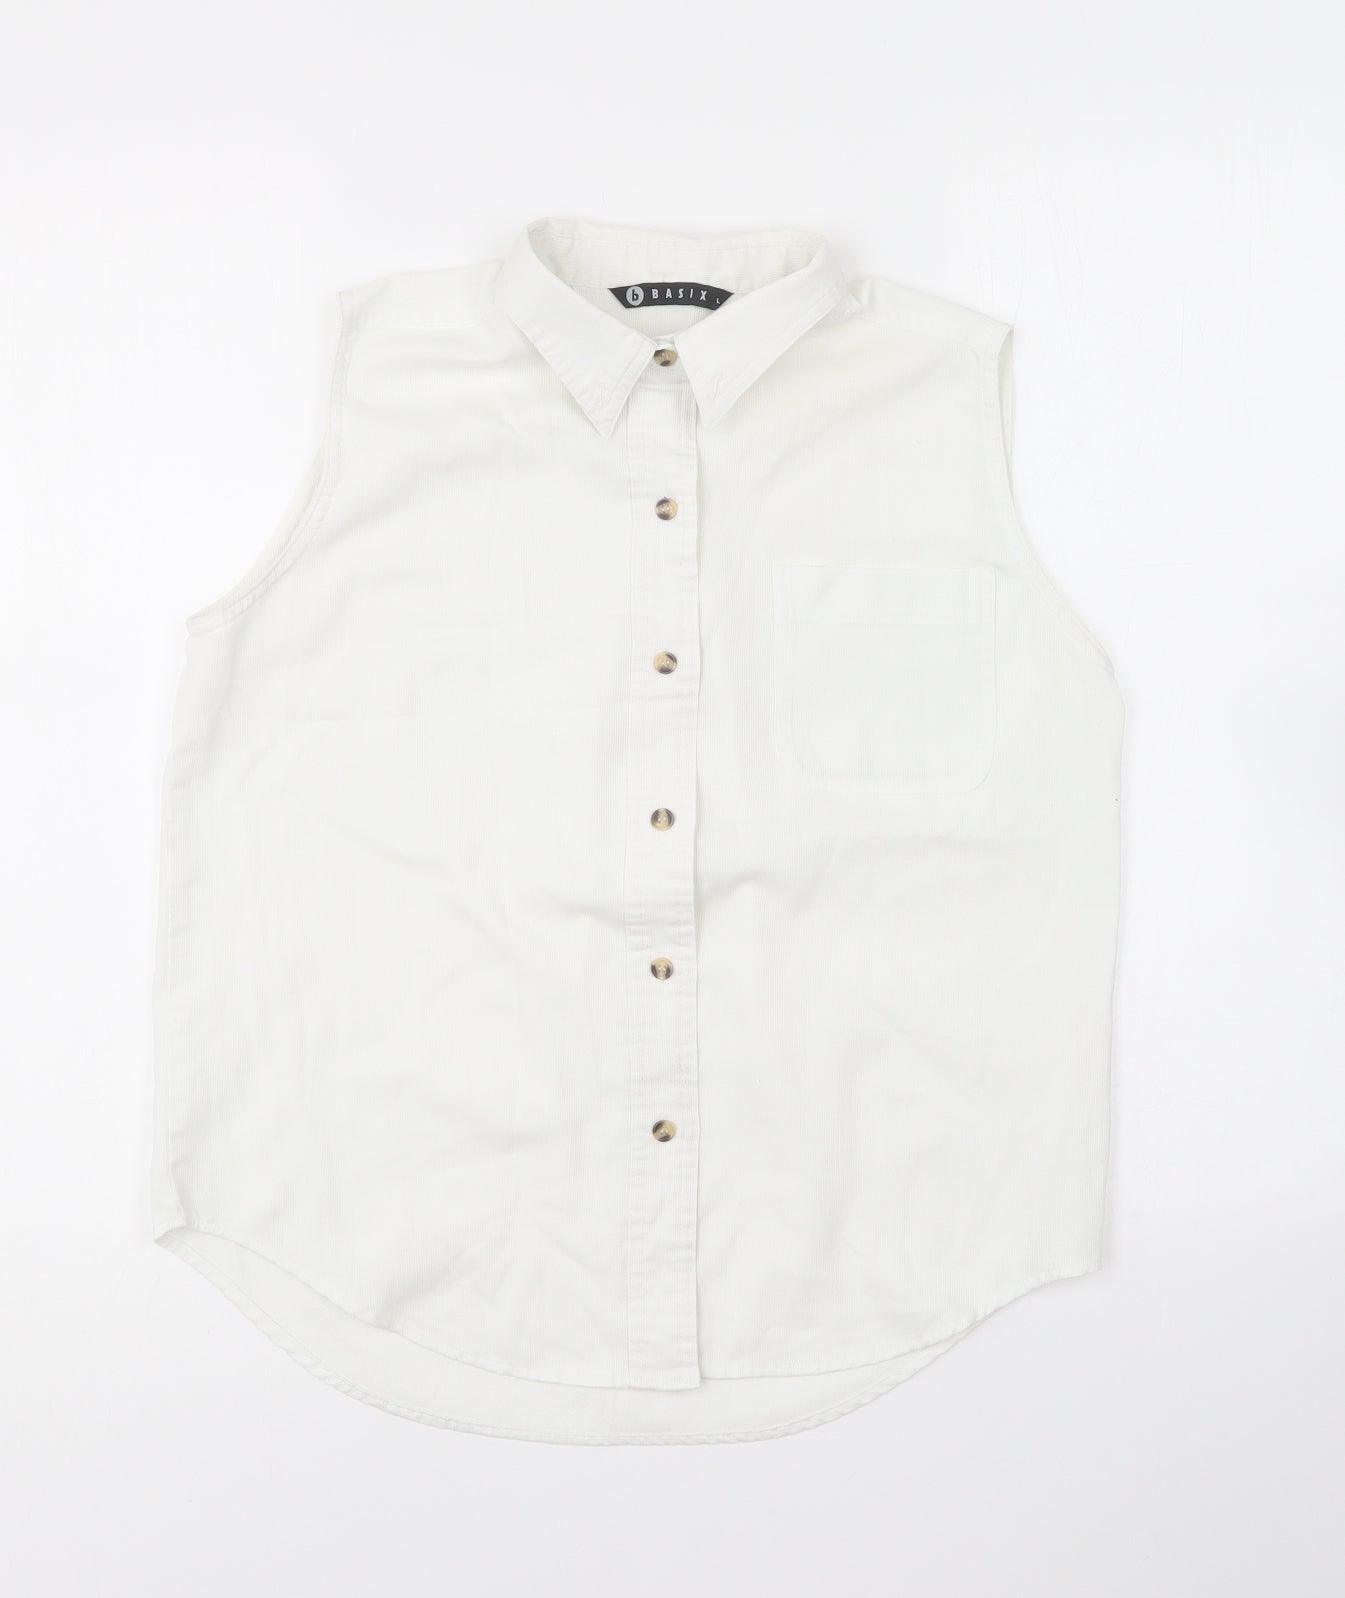 Basix Womens White Cotton Basic Button-Up Size L Collared